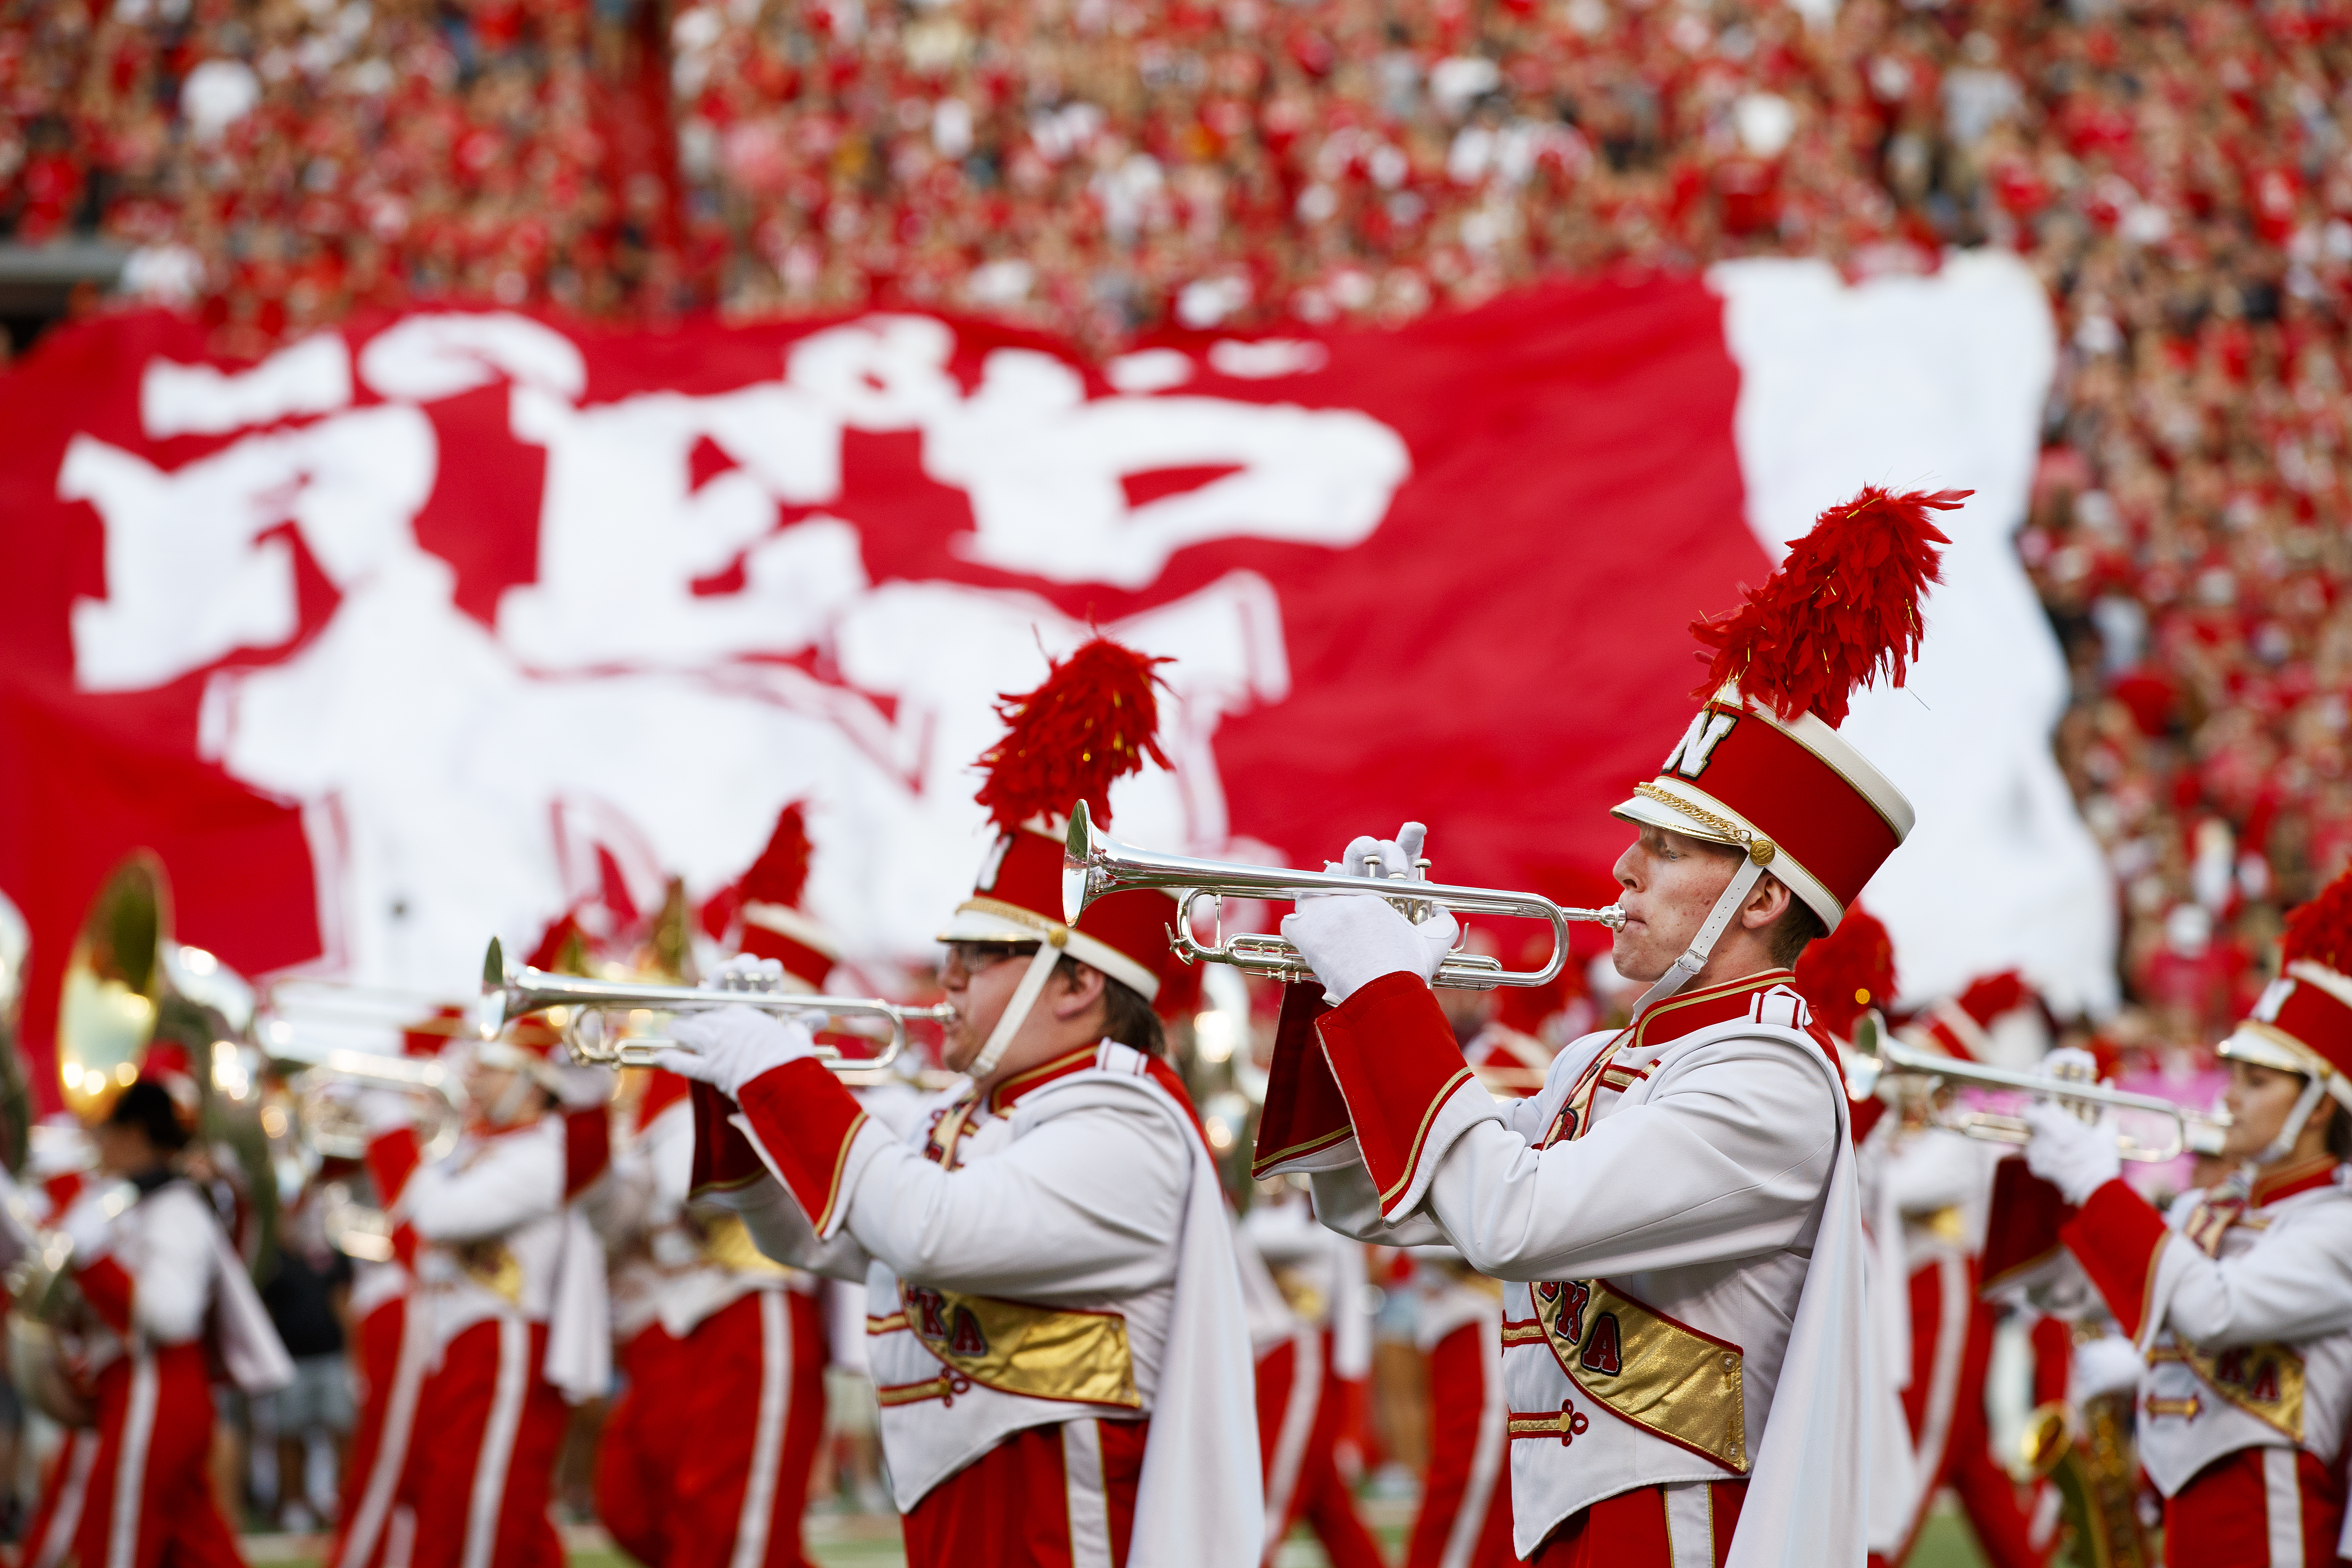 The Cornhusker Marching Band performs at the start of the Sept. 2 game with Arkansas State University. More than 30 members of the band are participating in the 22in22 Challenge, which is designed to raise awareness about veteran suicides and raise funds for veteran support services.